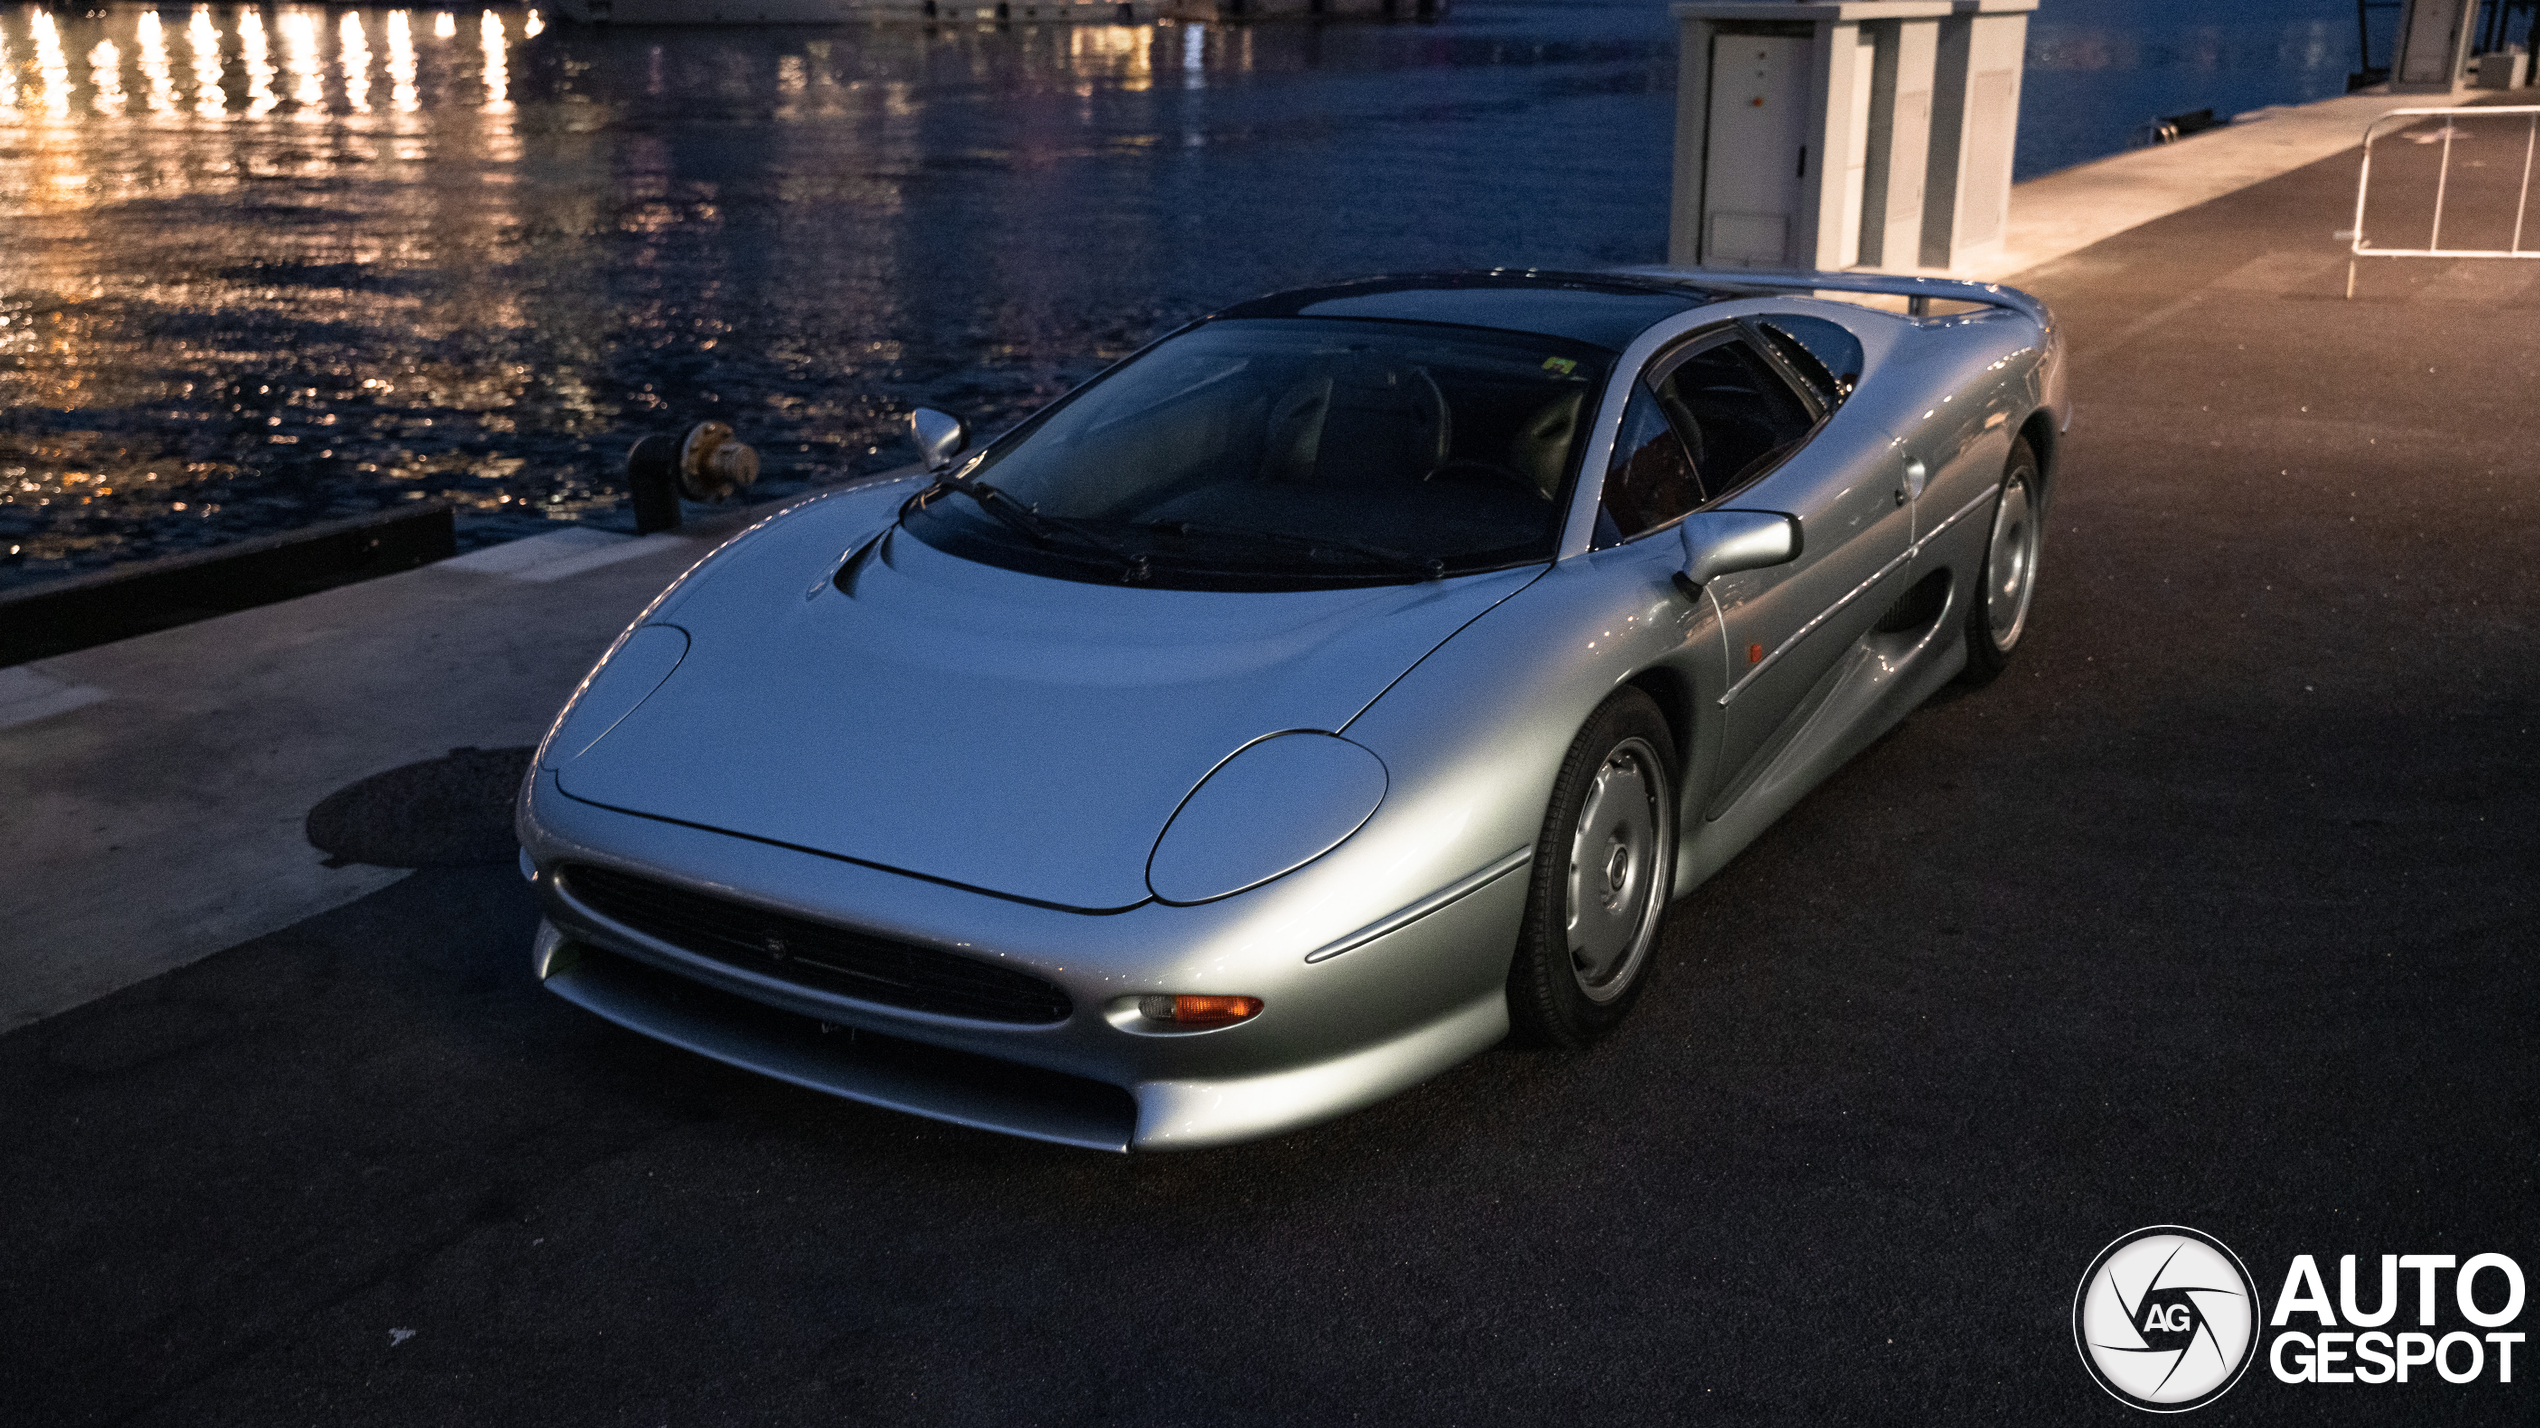 The super sports car Jaguar is featured as a model in the harbor of Monaco.